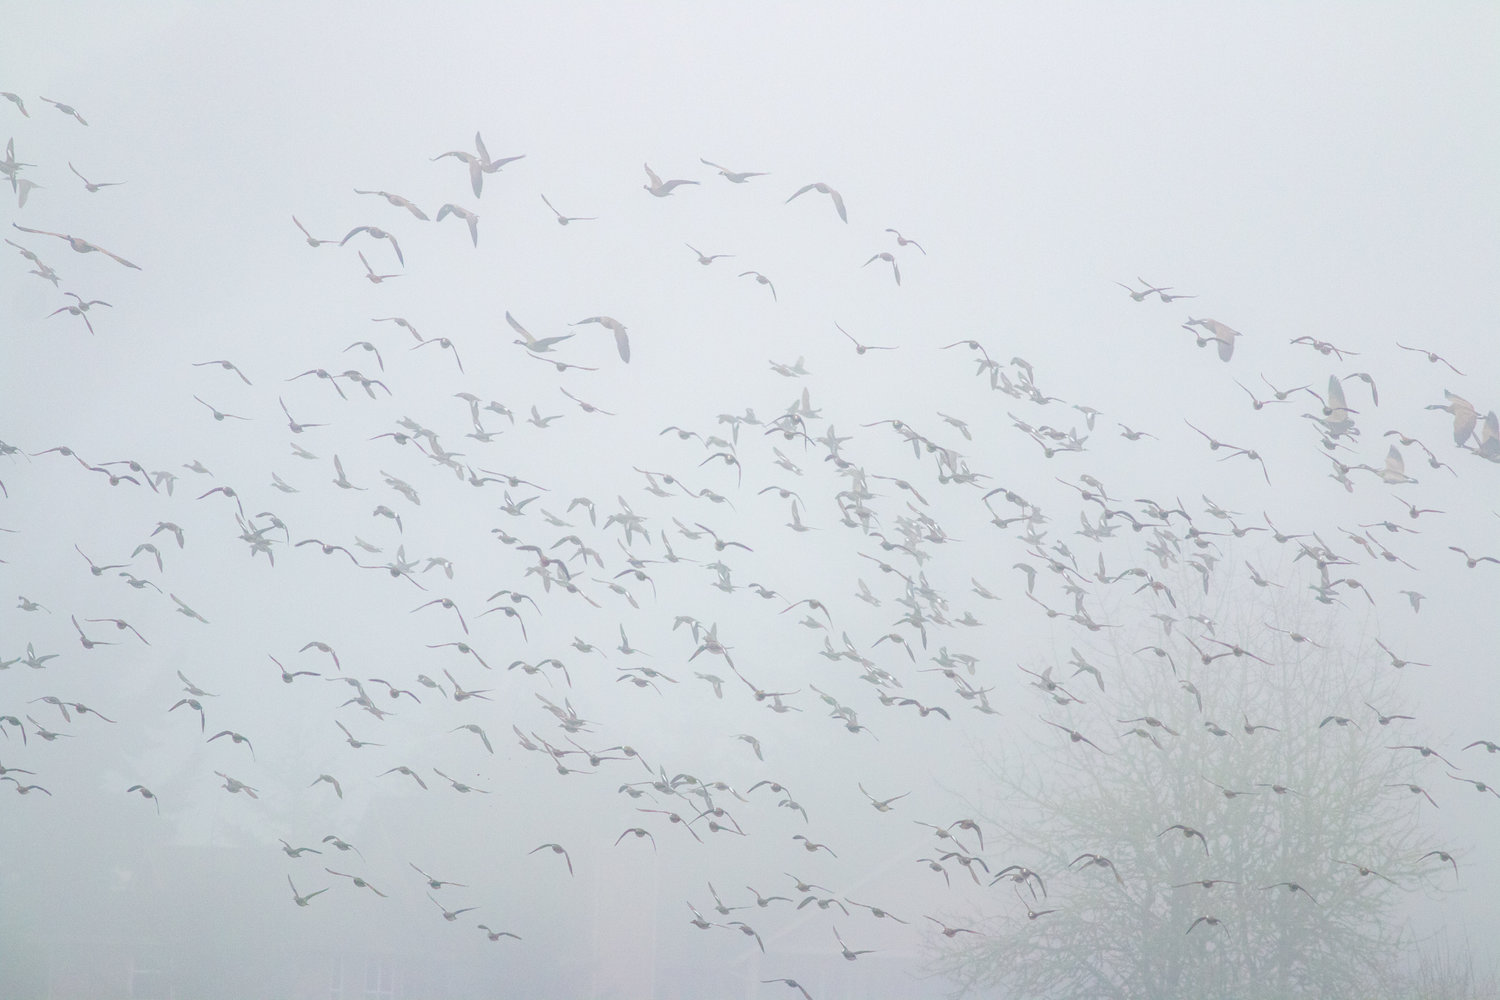 Geese fly away through the fog near the Willapa Hills Trail after a pair of bald eagles flew in nearby on Monday morning.